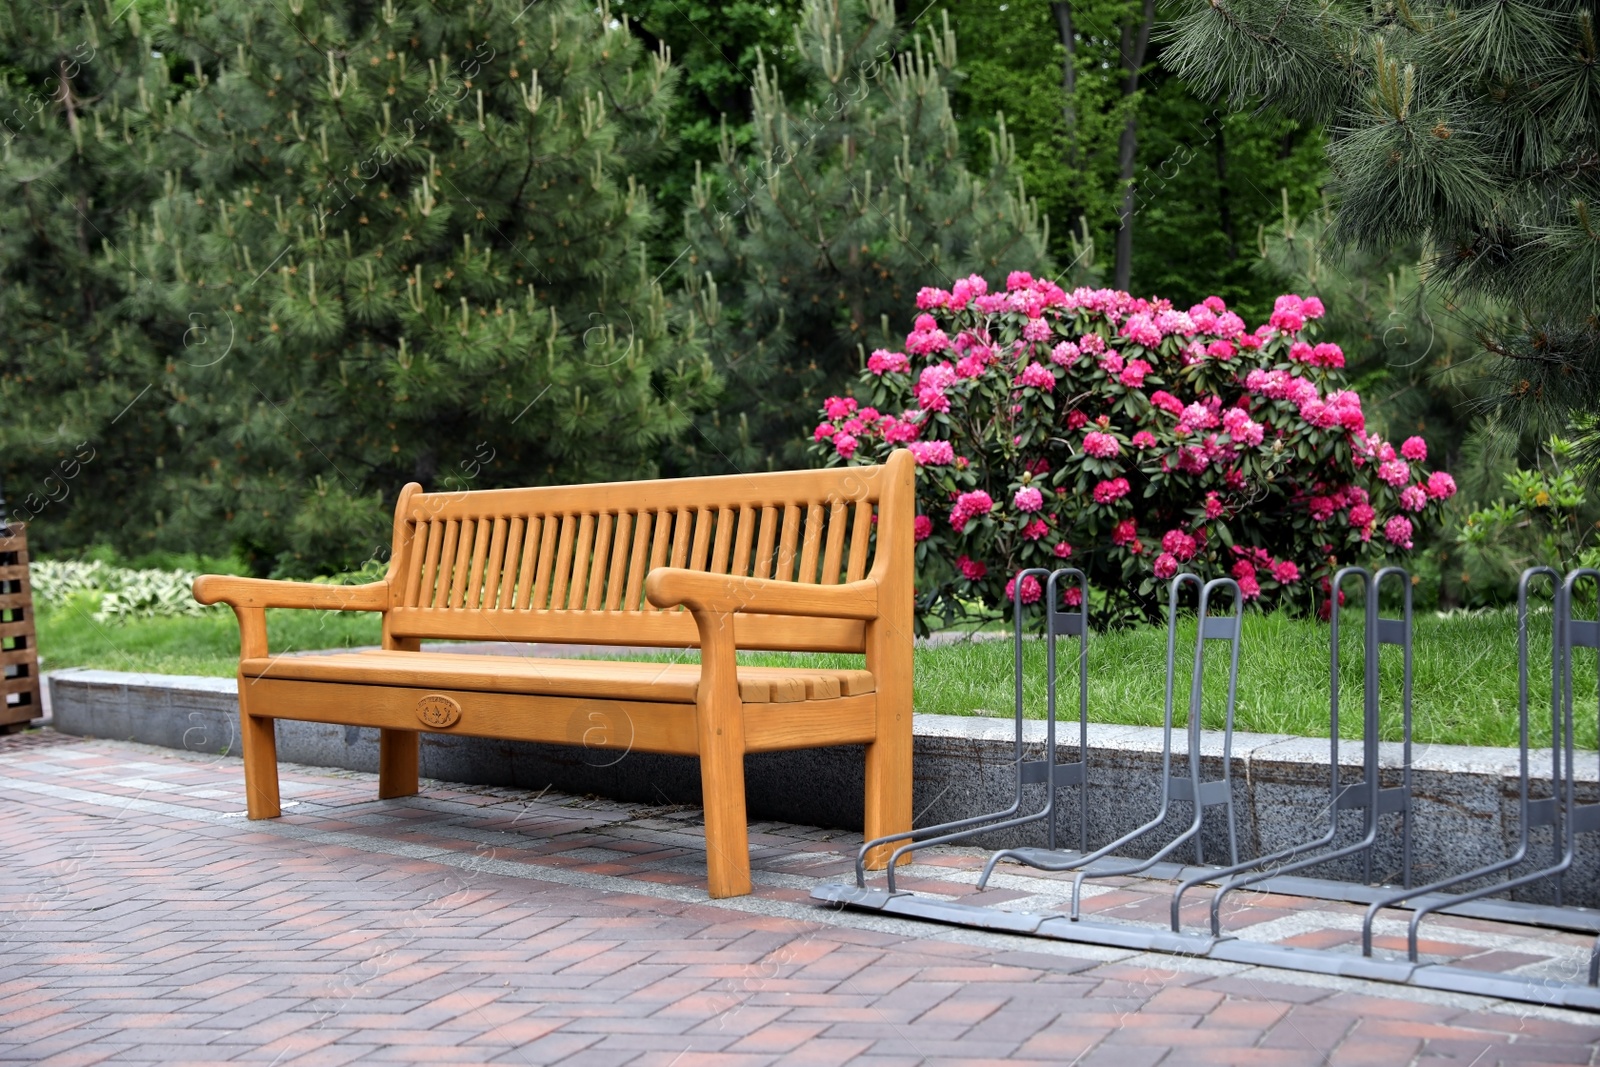 Photo of Comfortable wooden bench and bicycle parking rack in garden